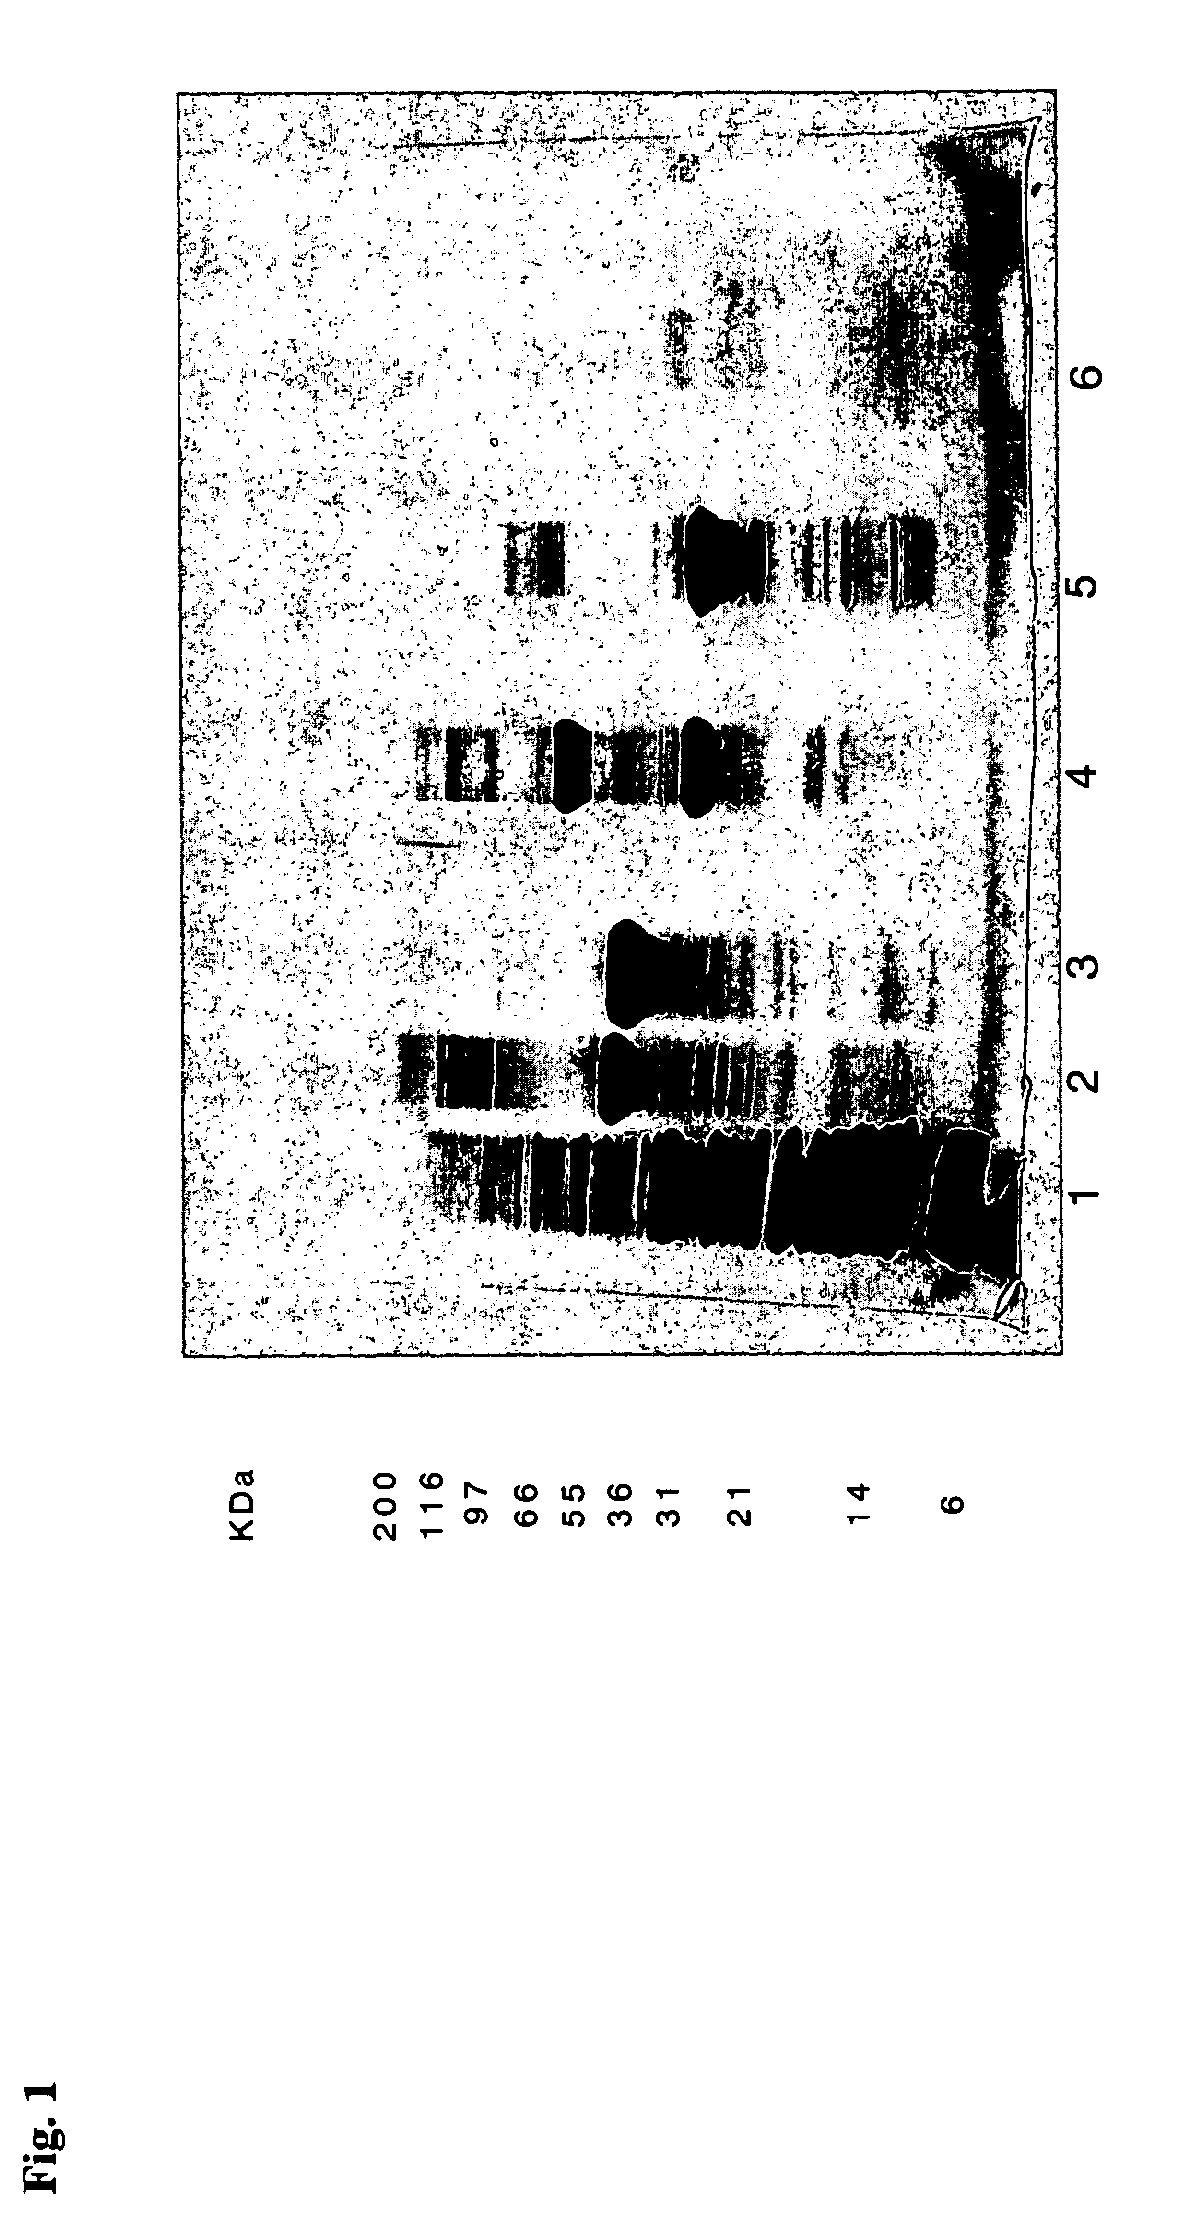 Antibody purification by protein a and ion exchange chromatography